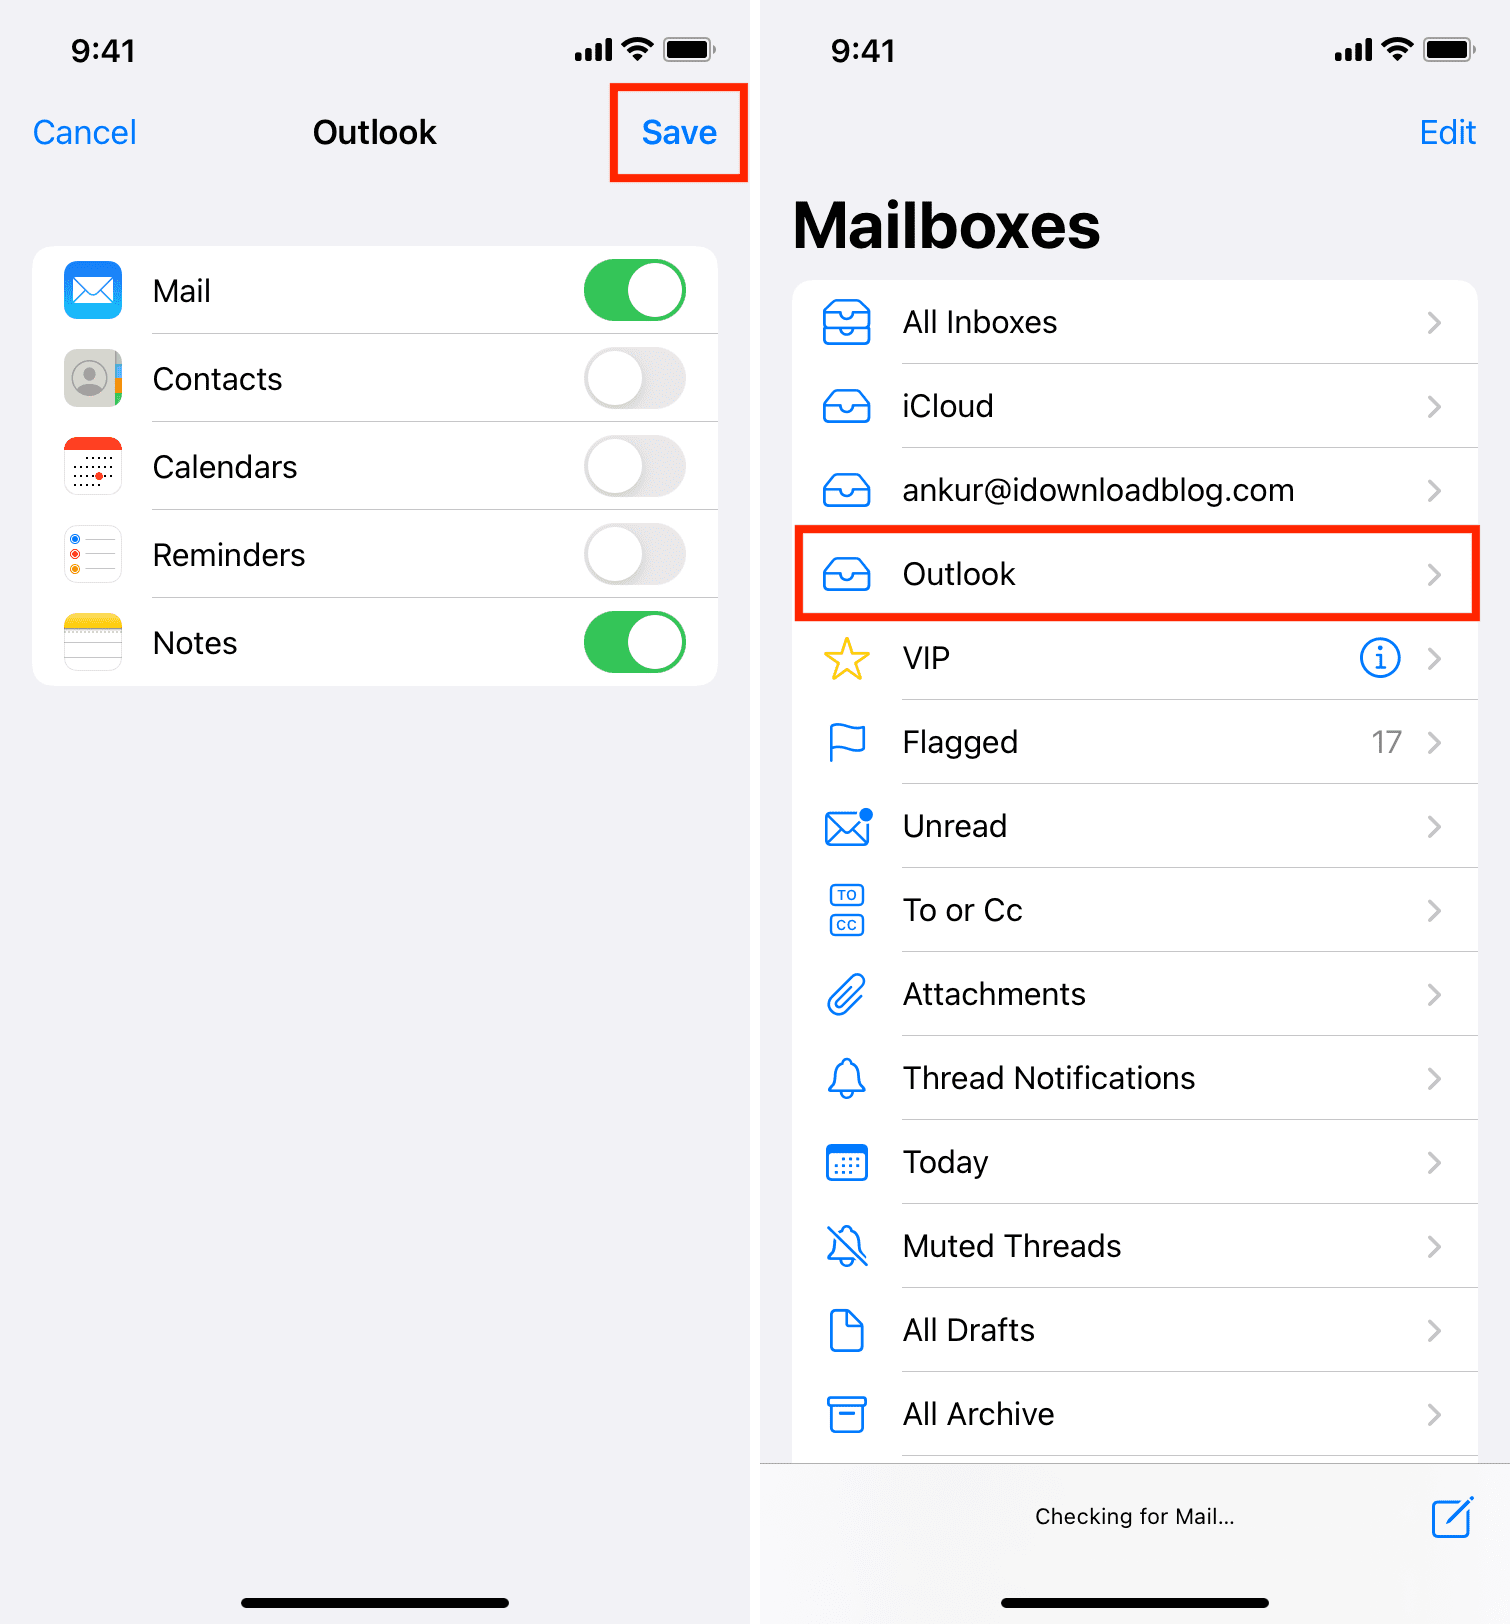 New email account set up in iOS Mail app on iPhone